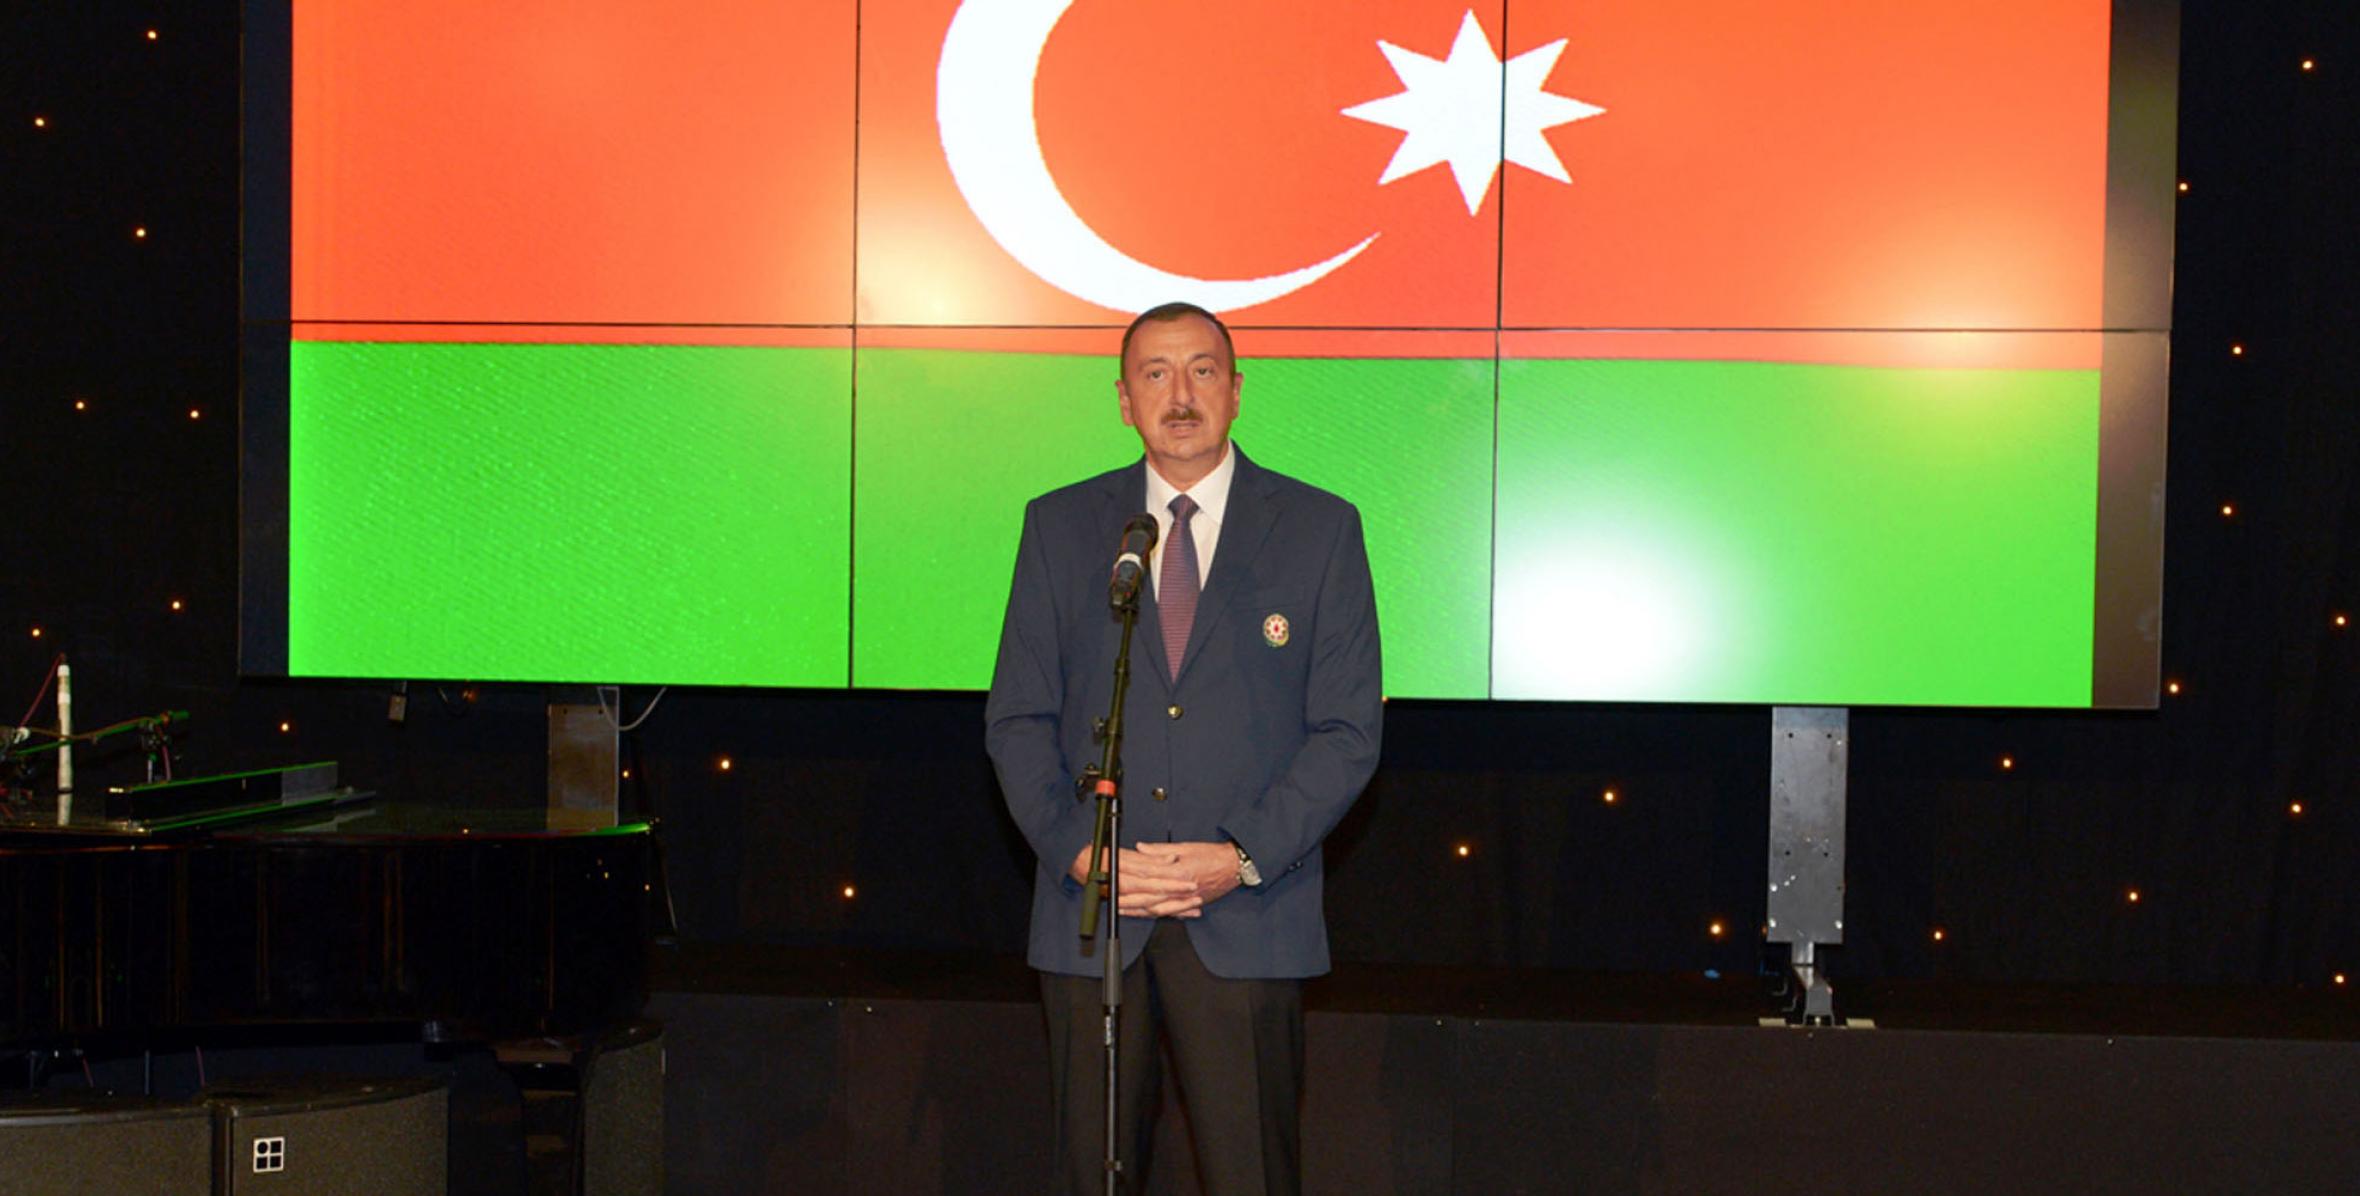 Ilham Aliyev attended the “Day of Azerbaijan” ceremony on the sidelines of the 30th Summer Games in London